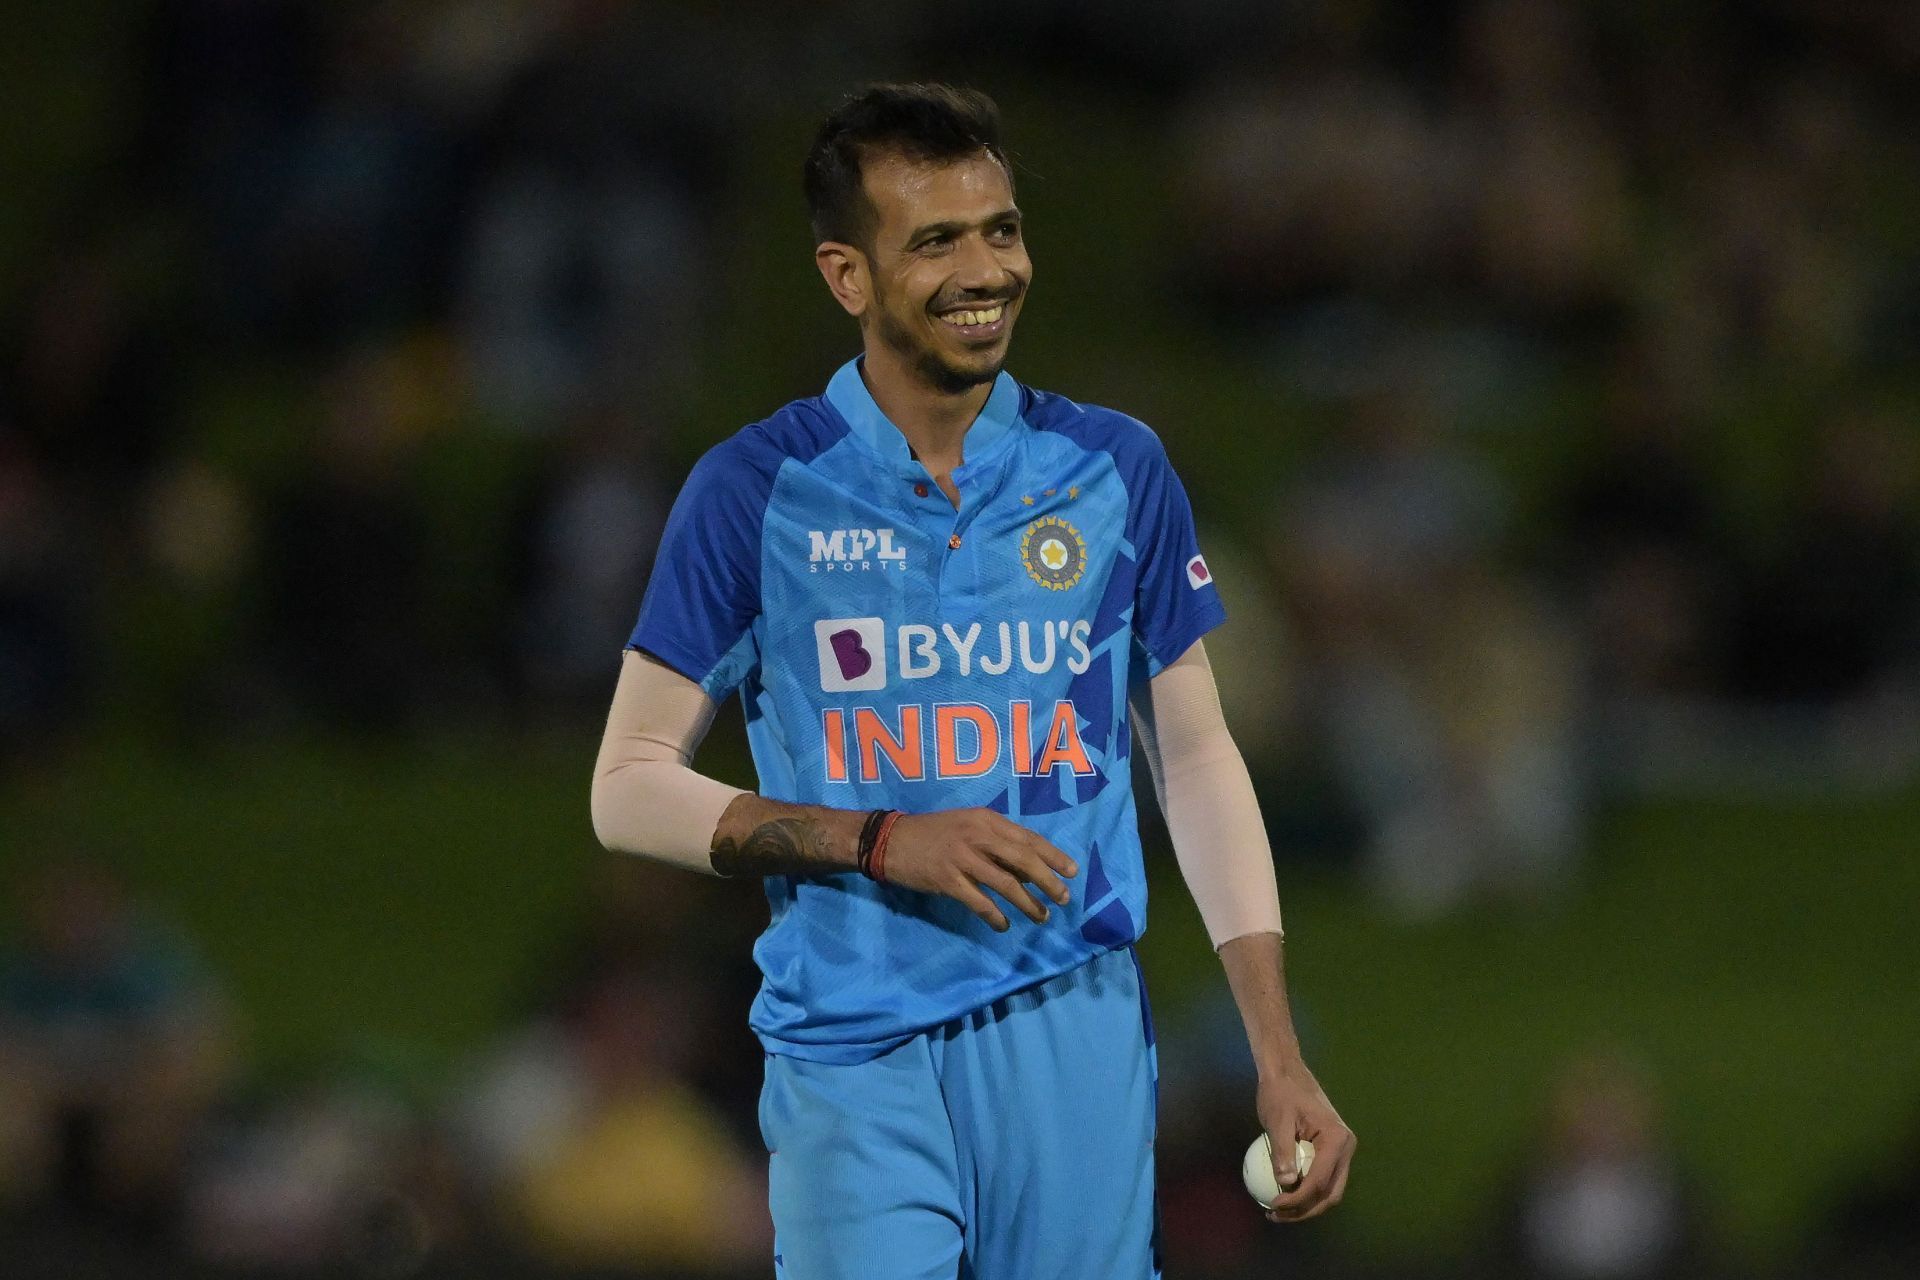 Yuzvendra Chahal finished with figures of 1/36 in four overs.